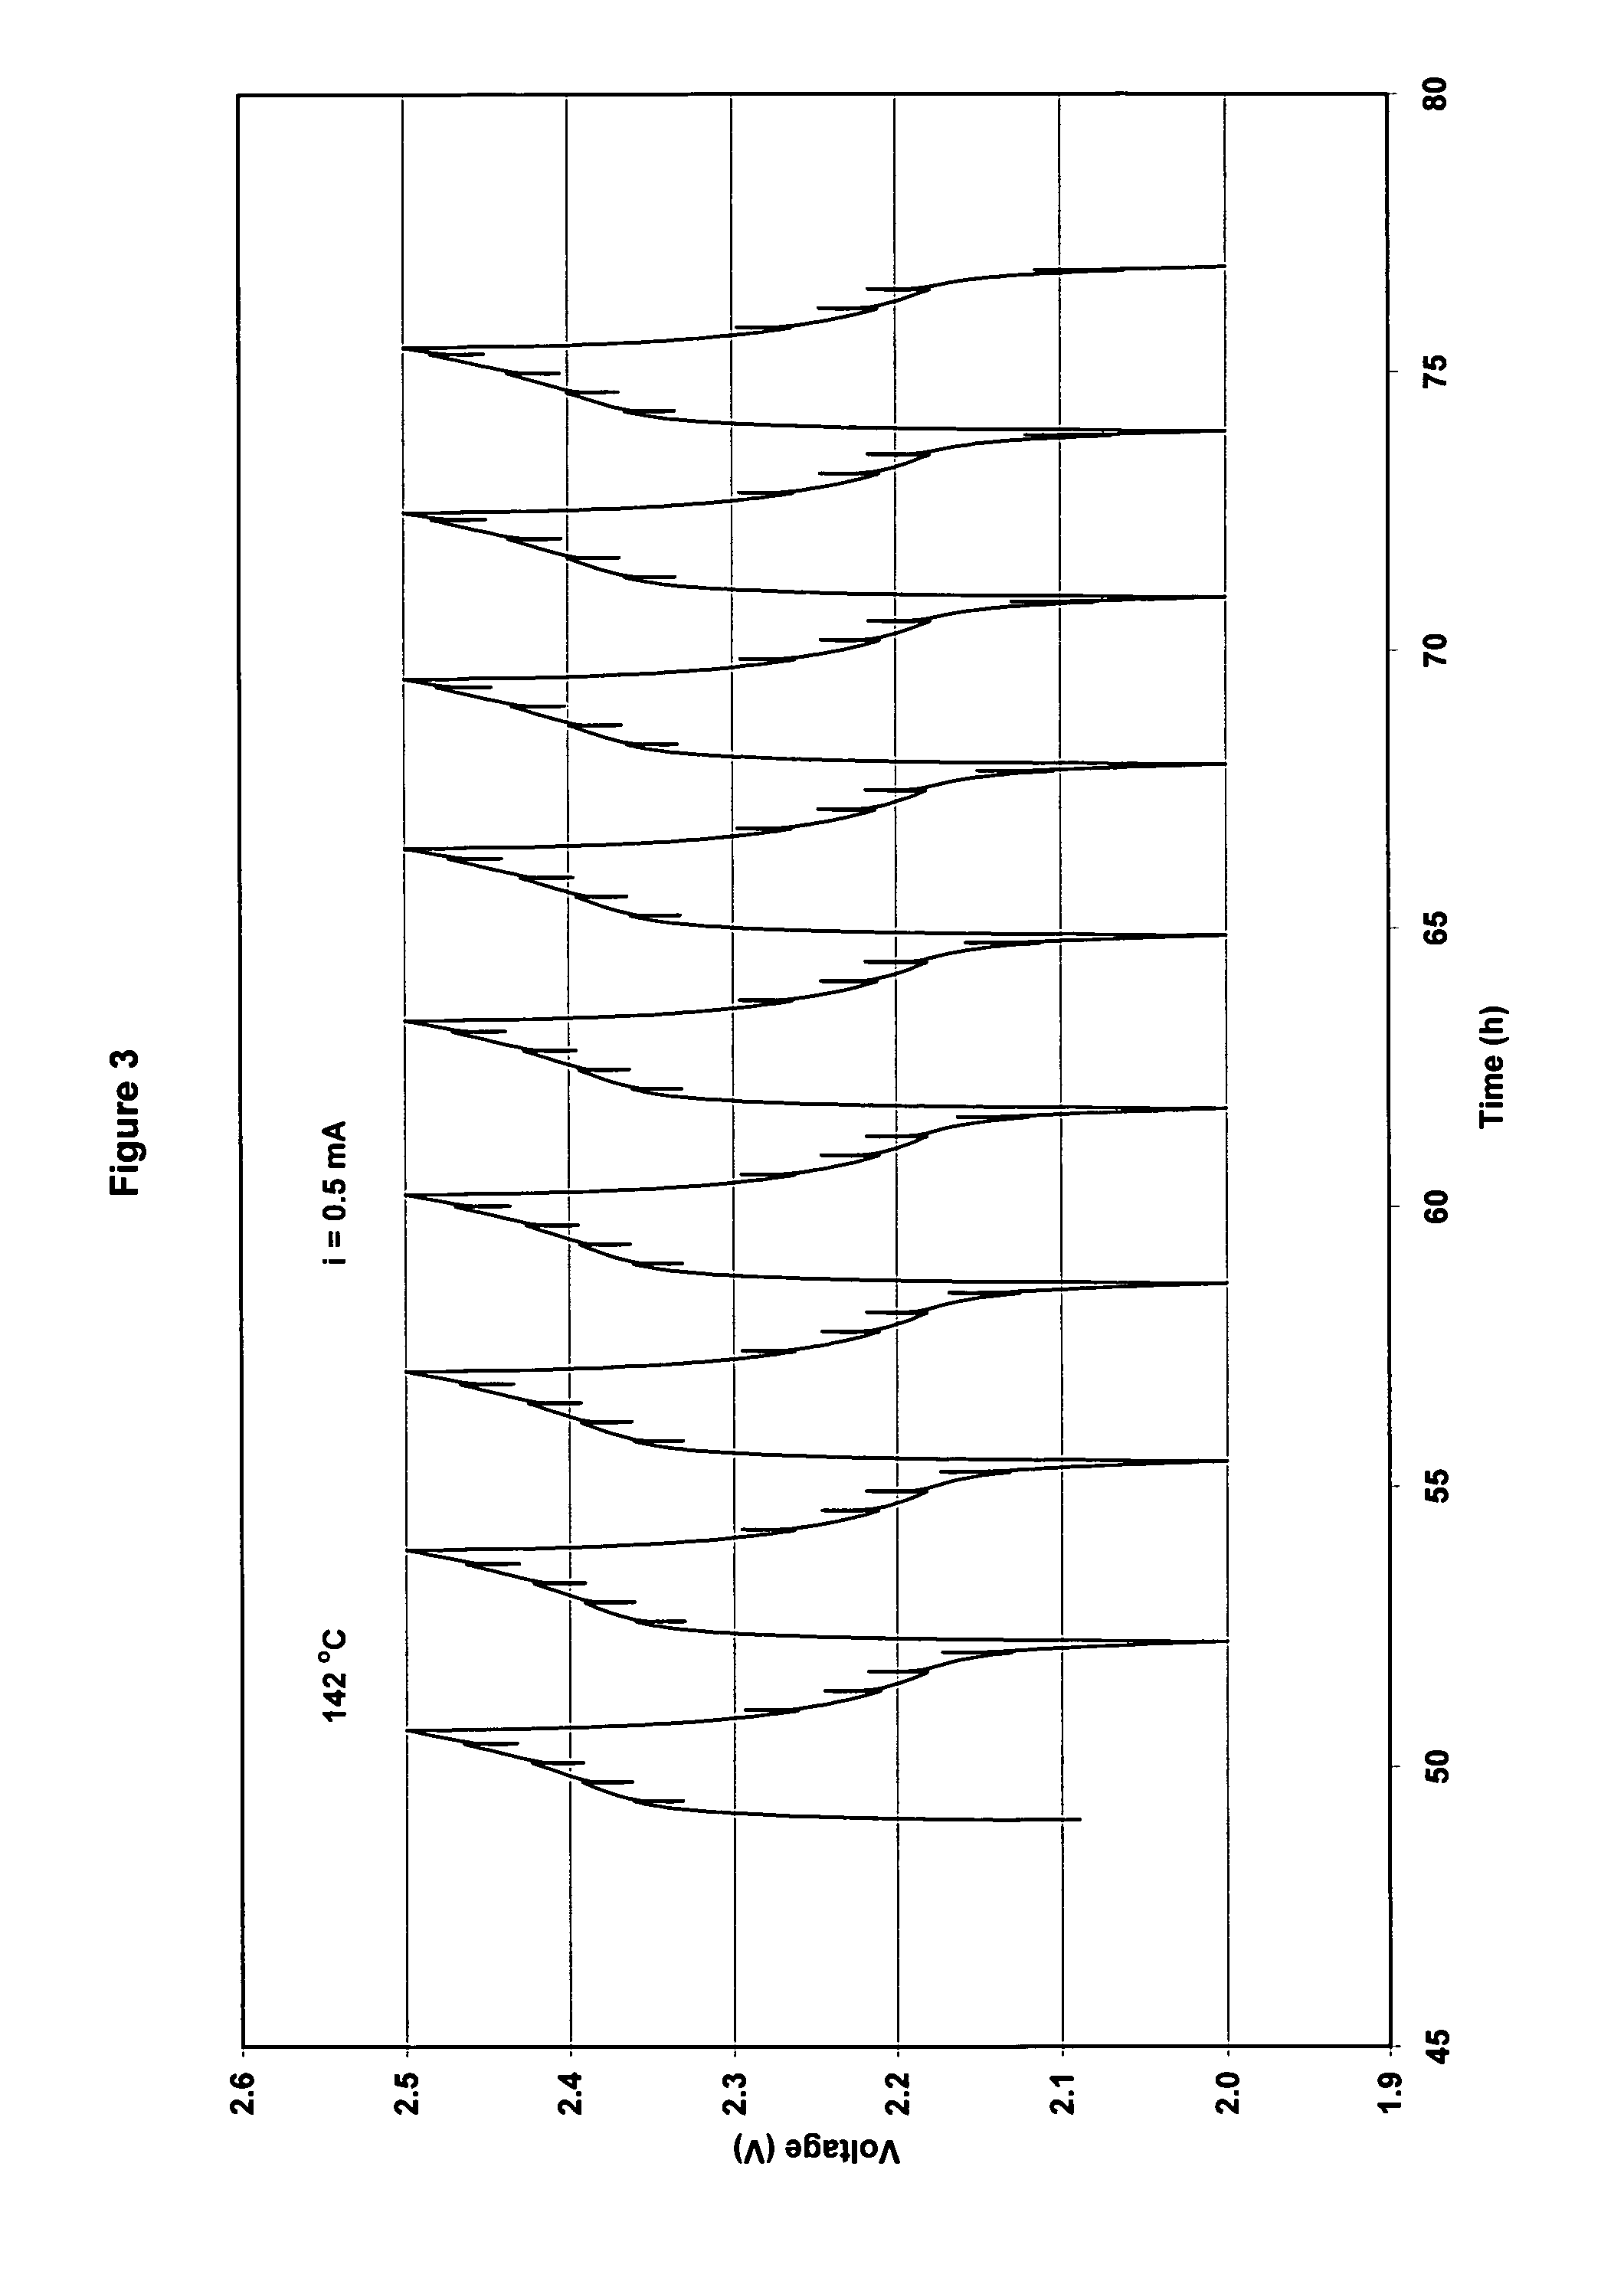 Lithium-ion cell with a wide operating temperature range